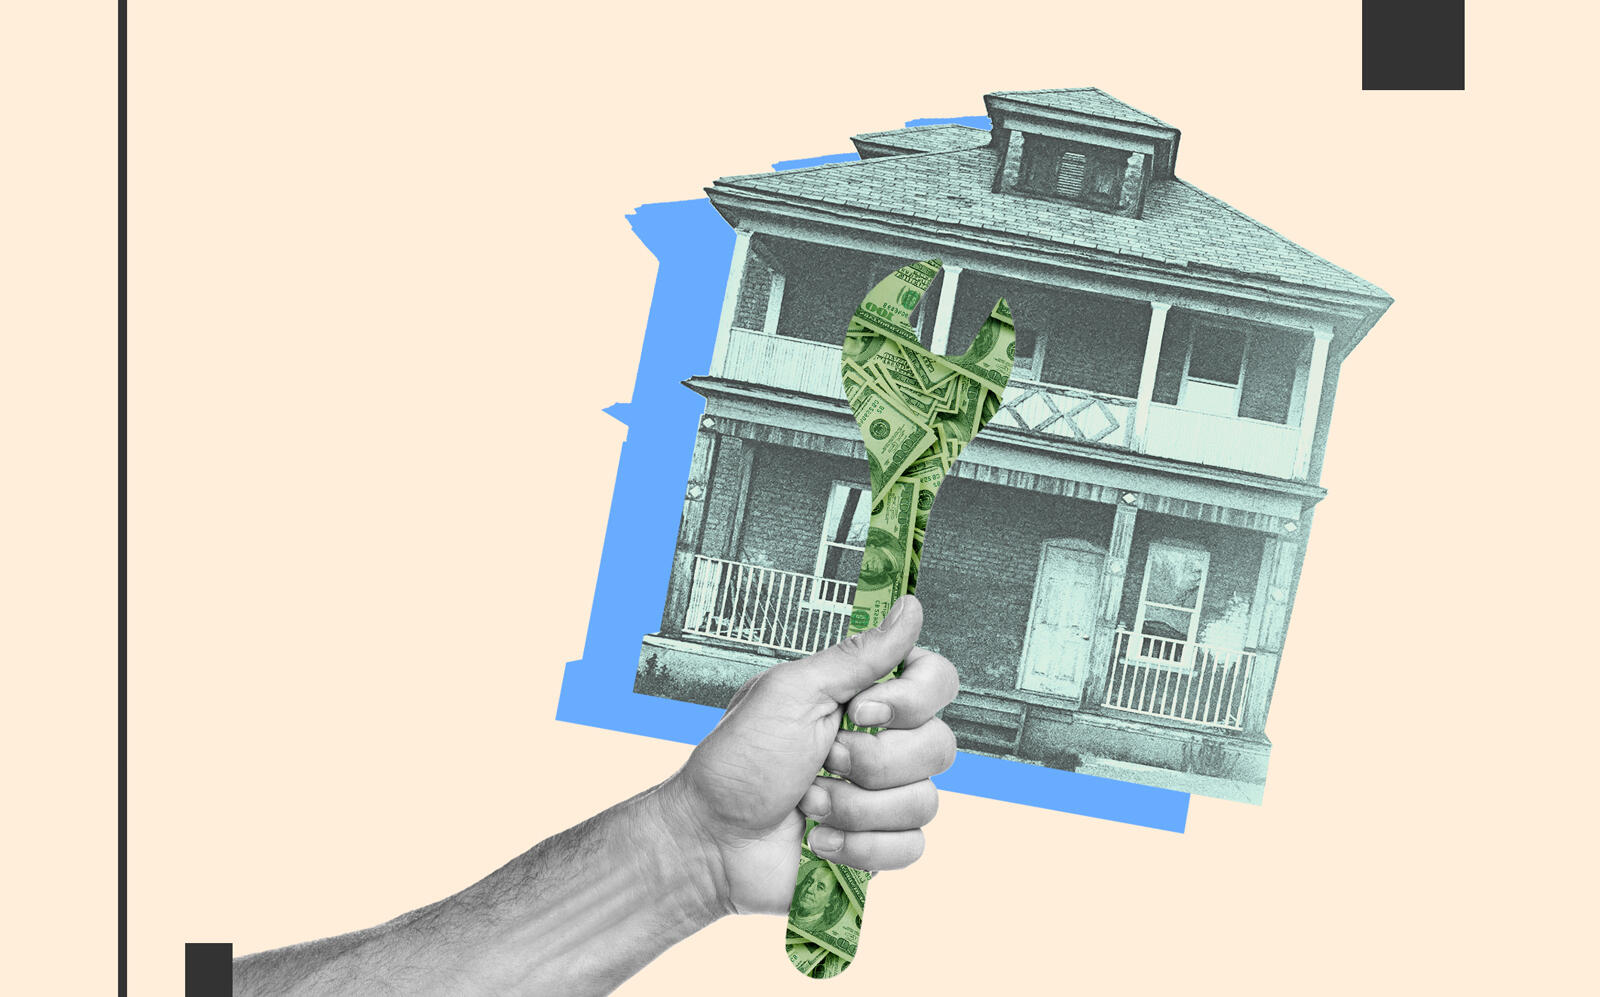 Buyers can expect a substantial discount on fixer-uppers